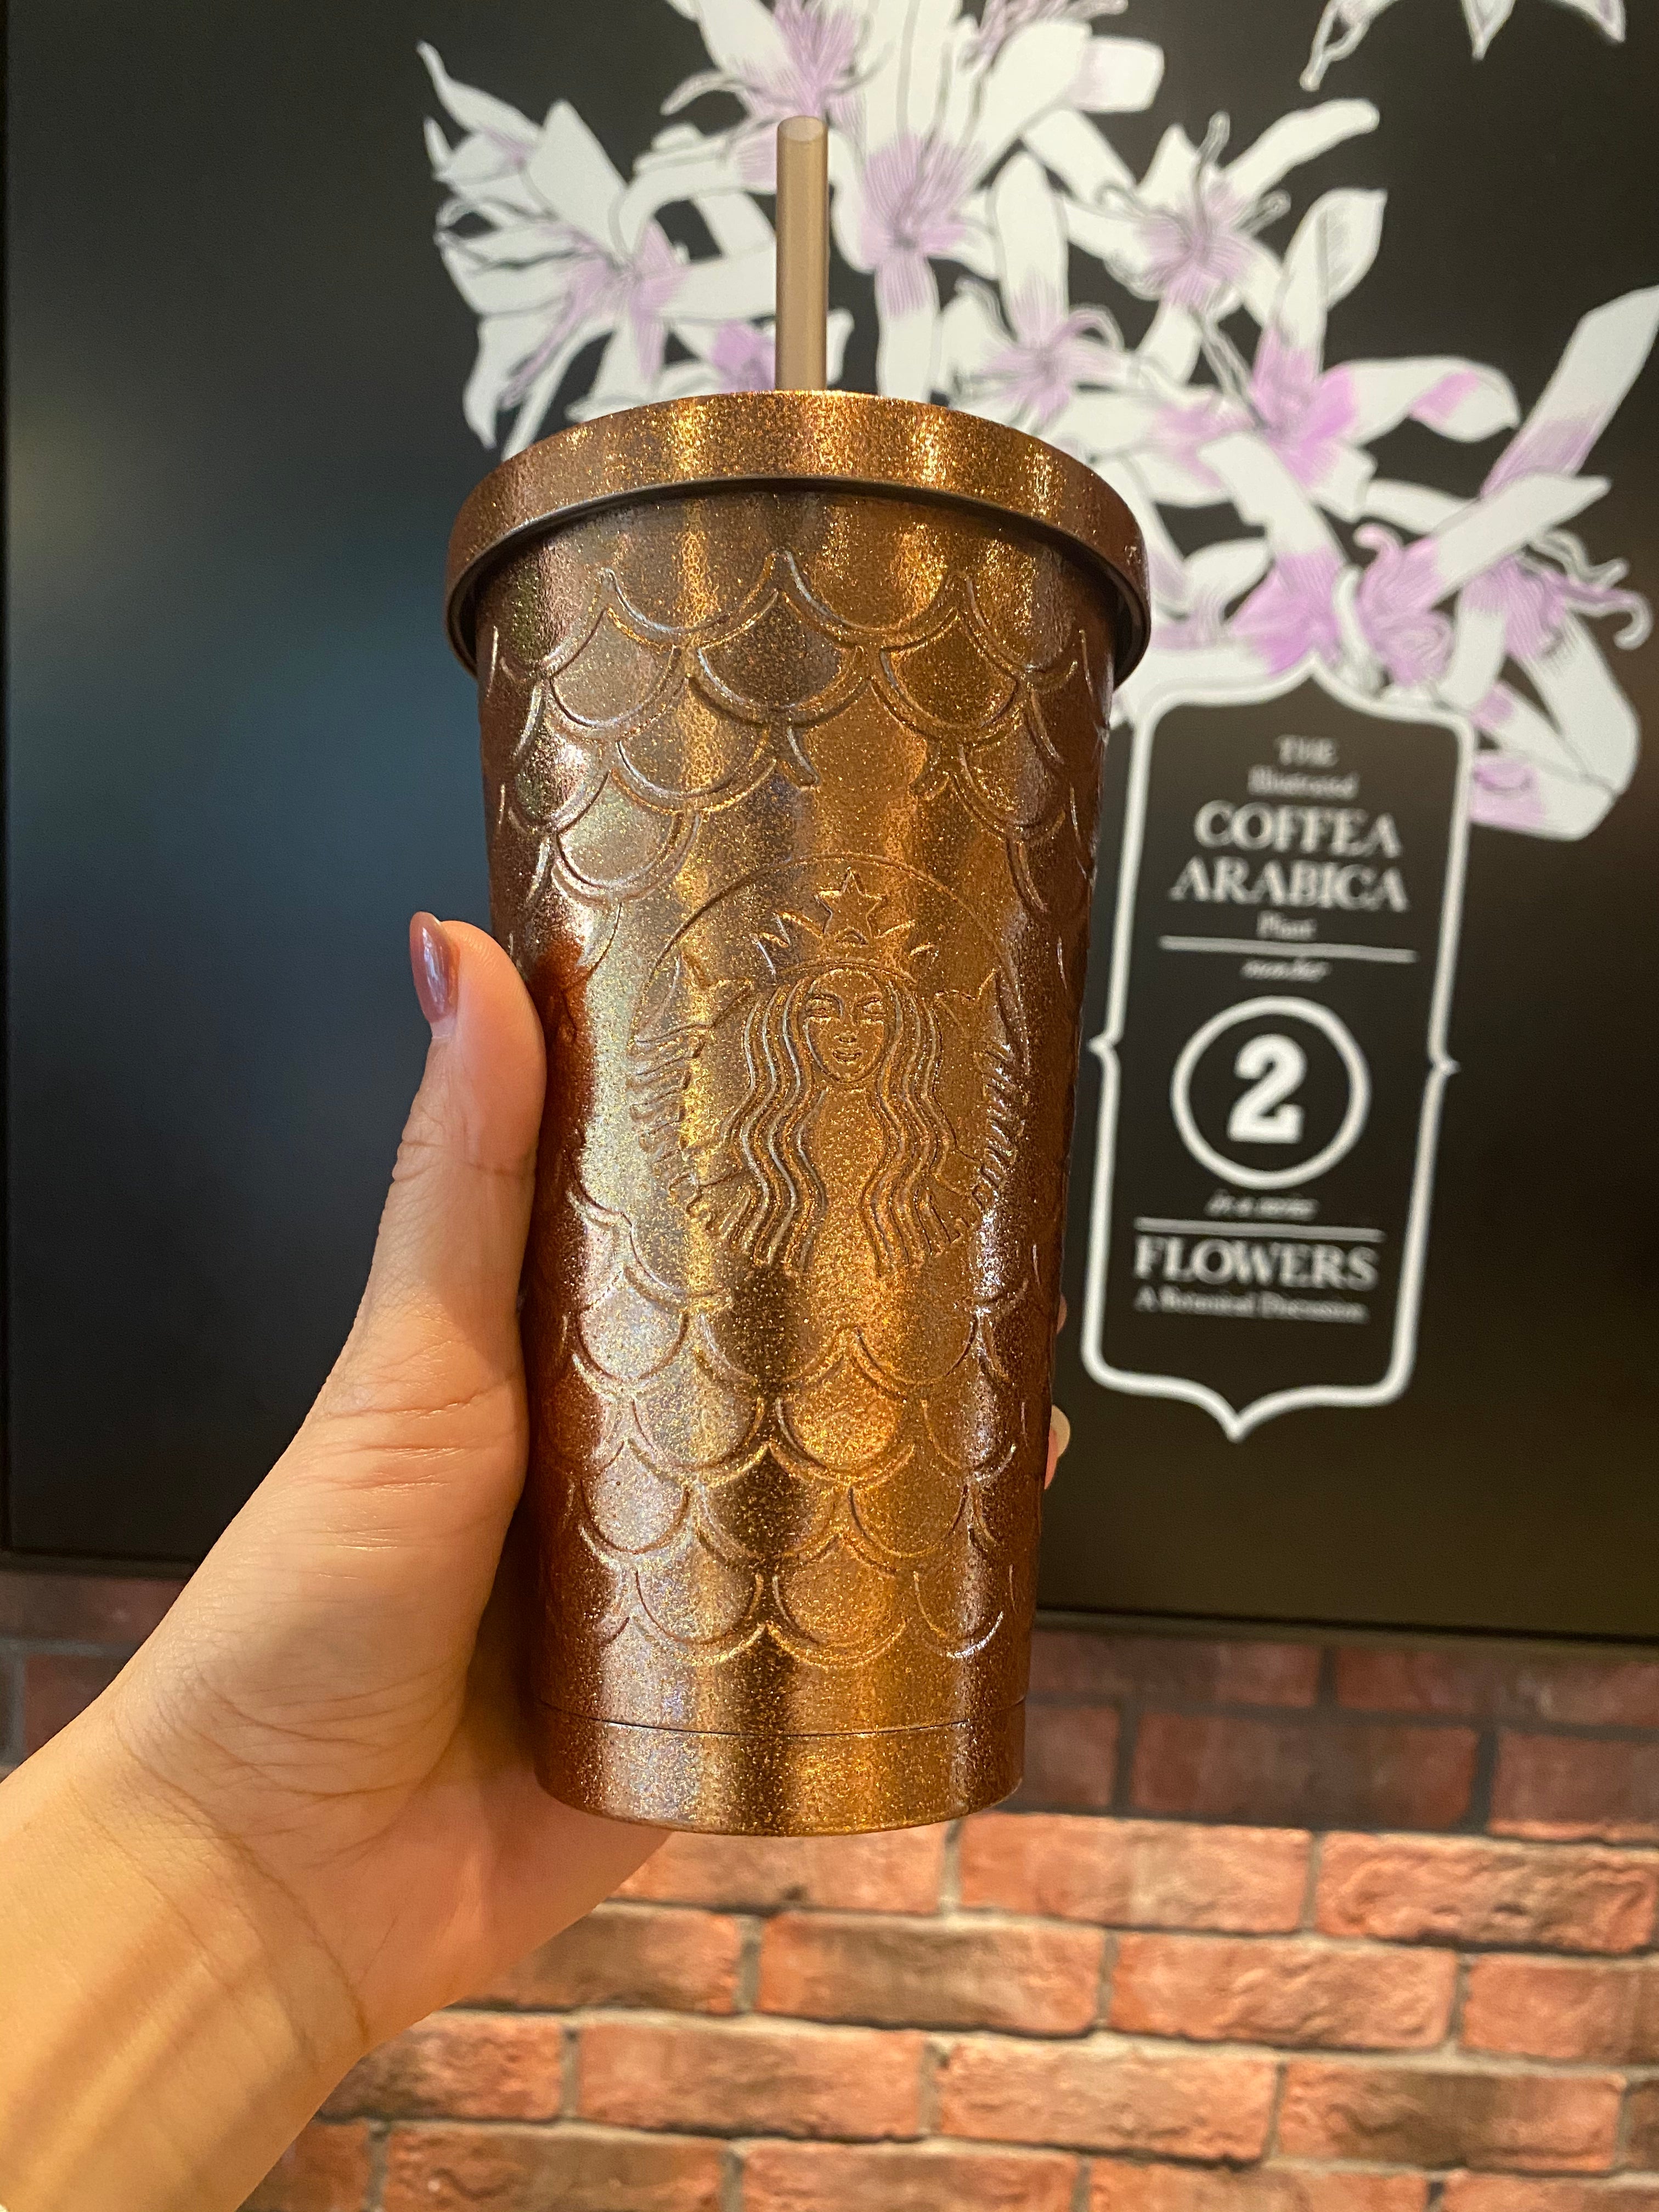 Starbucks China 2021 Pink Rose Gold 20oz Double Wall Glass Straw Cup  (Starbucks Pink Rose Gold Christmas 2021)